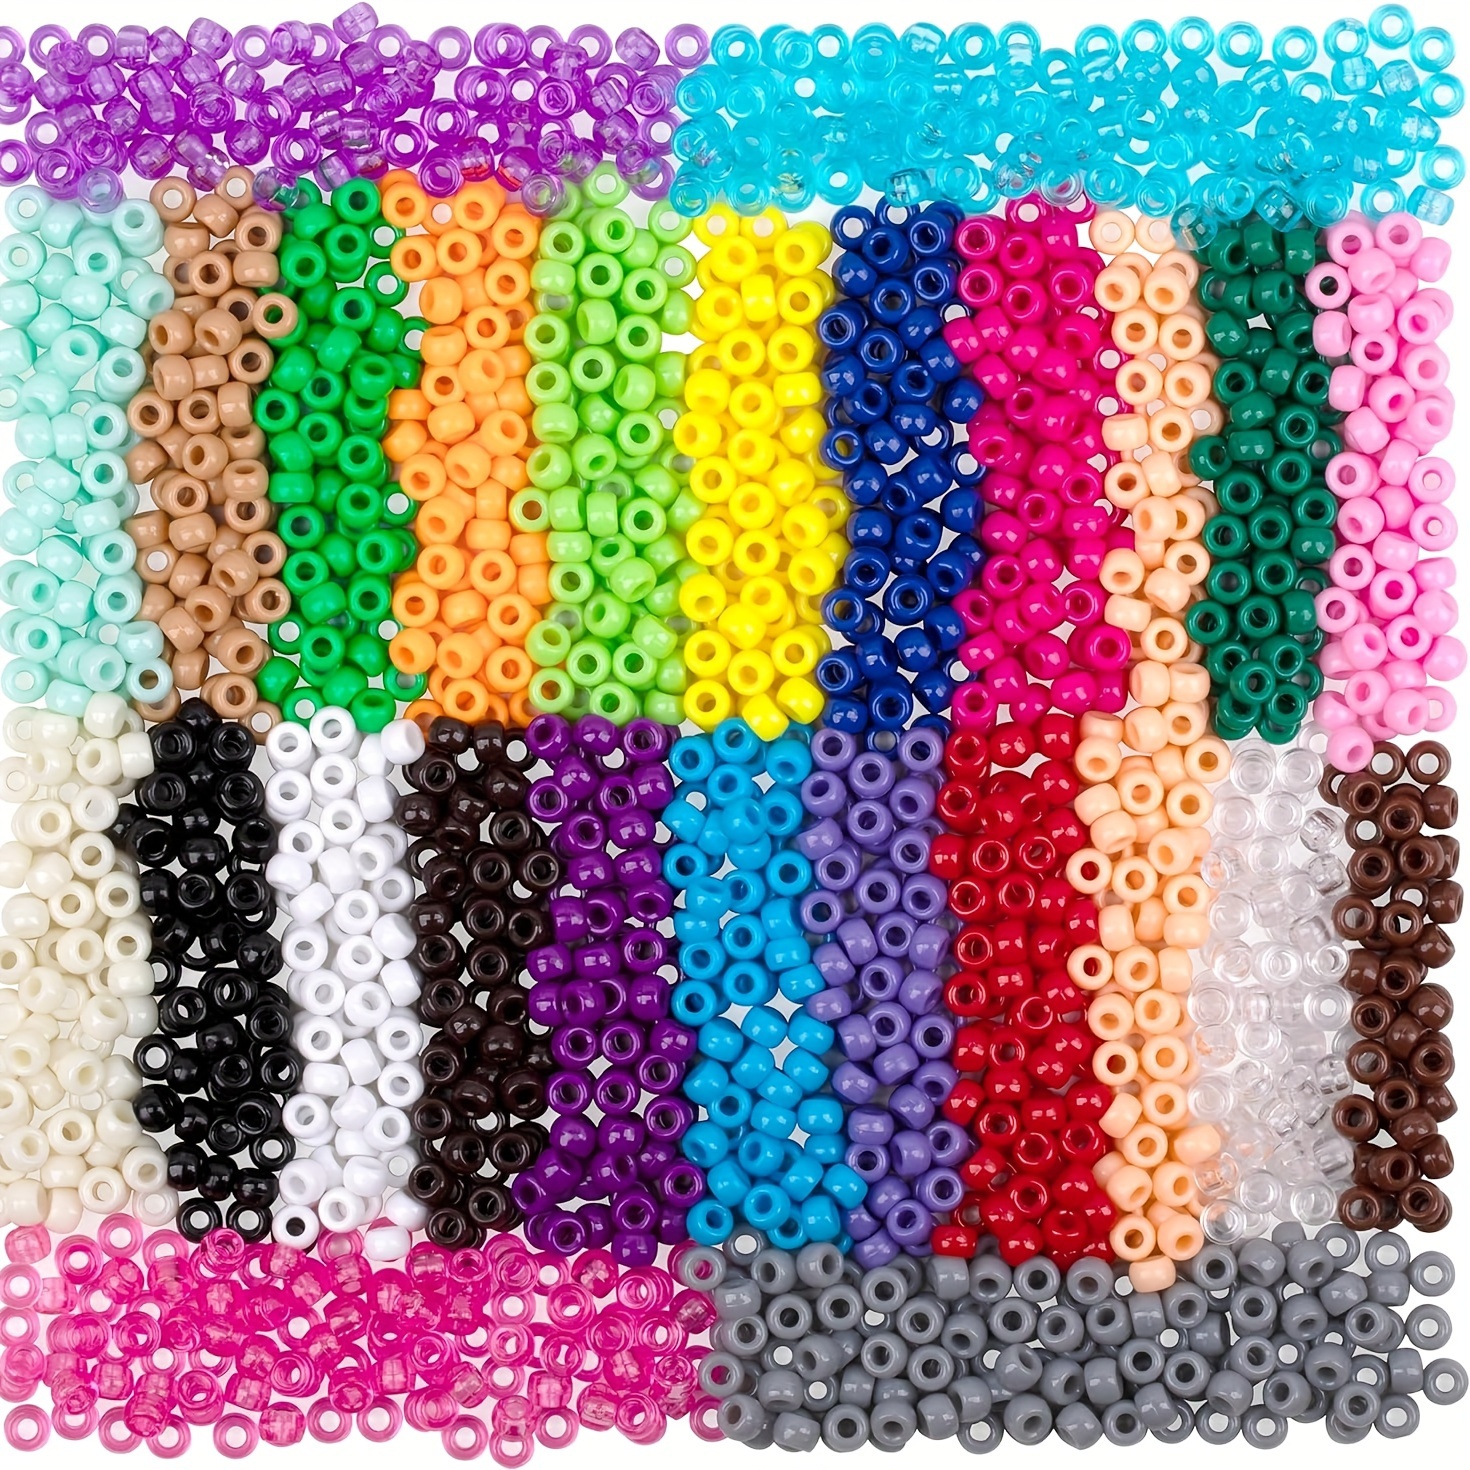 MAKERSLAND 2600+pcs Faceted Beads Kit 18 Color Rainbow Opaque Plastic Beads  Multicolor Loose Spacer Pony Beads Bulk Elastic String for Bracelets